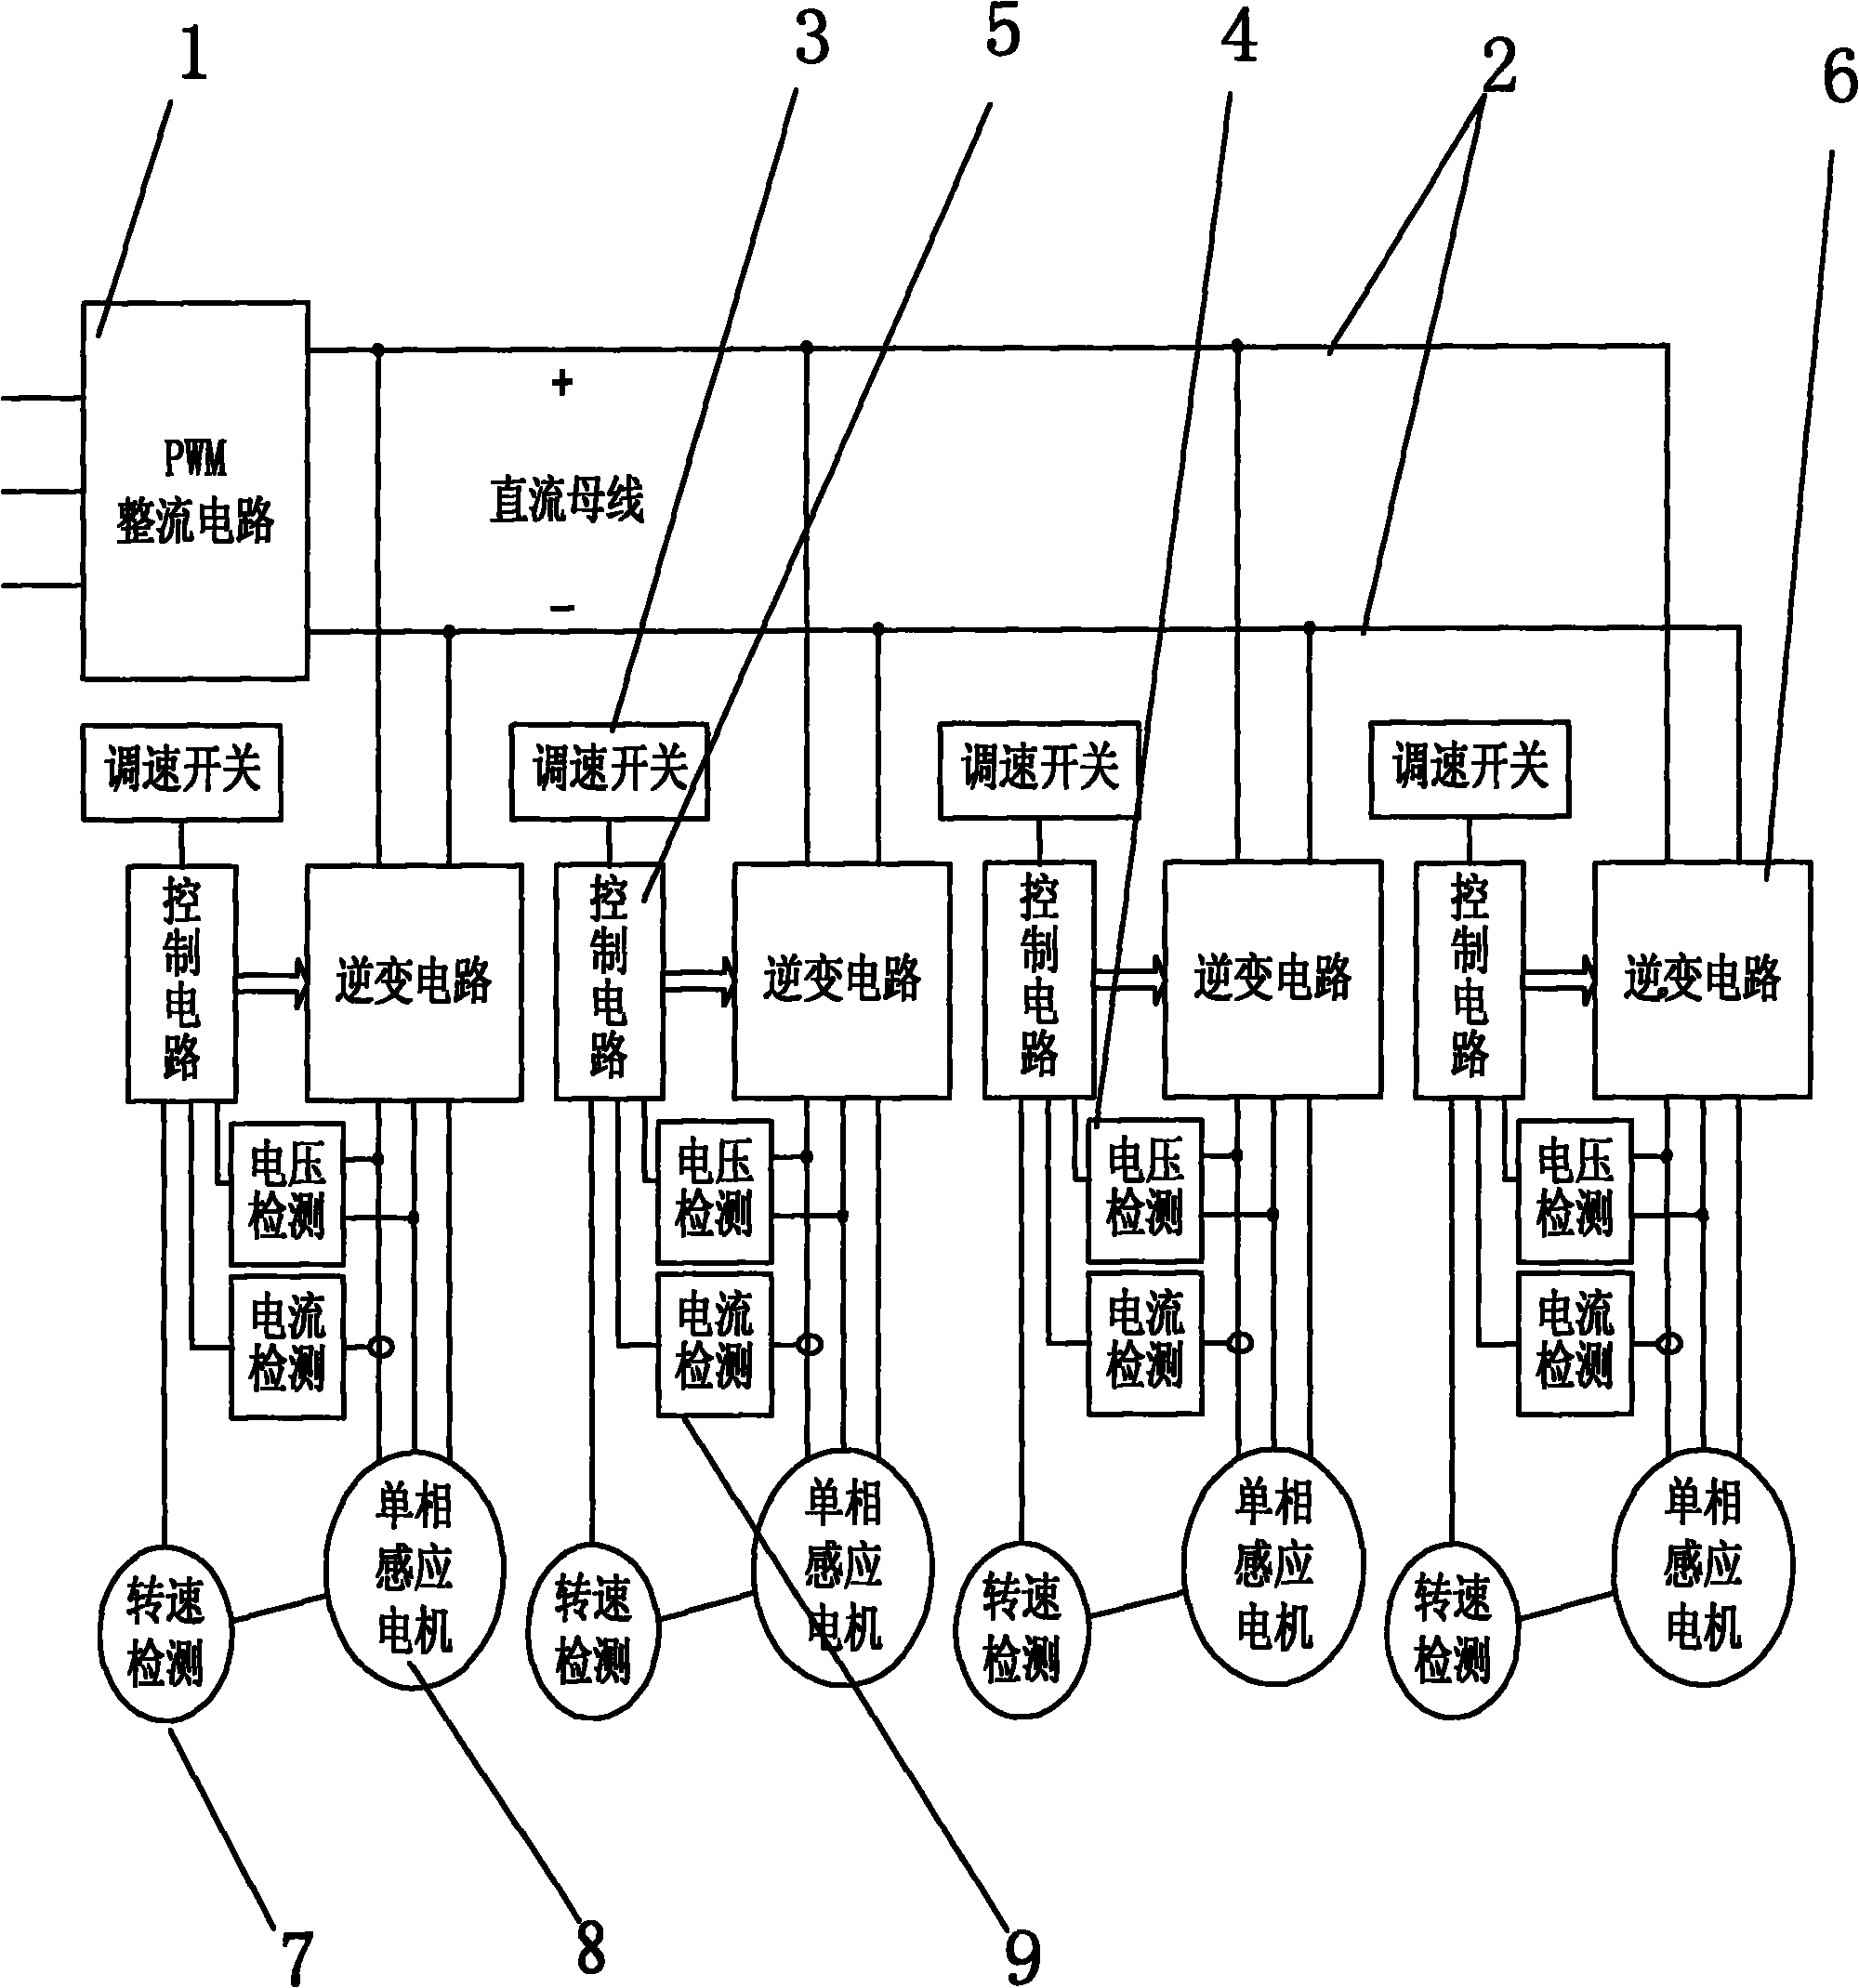 Speed regulation control system of single-phase induction motor